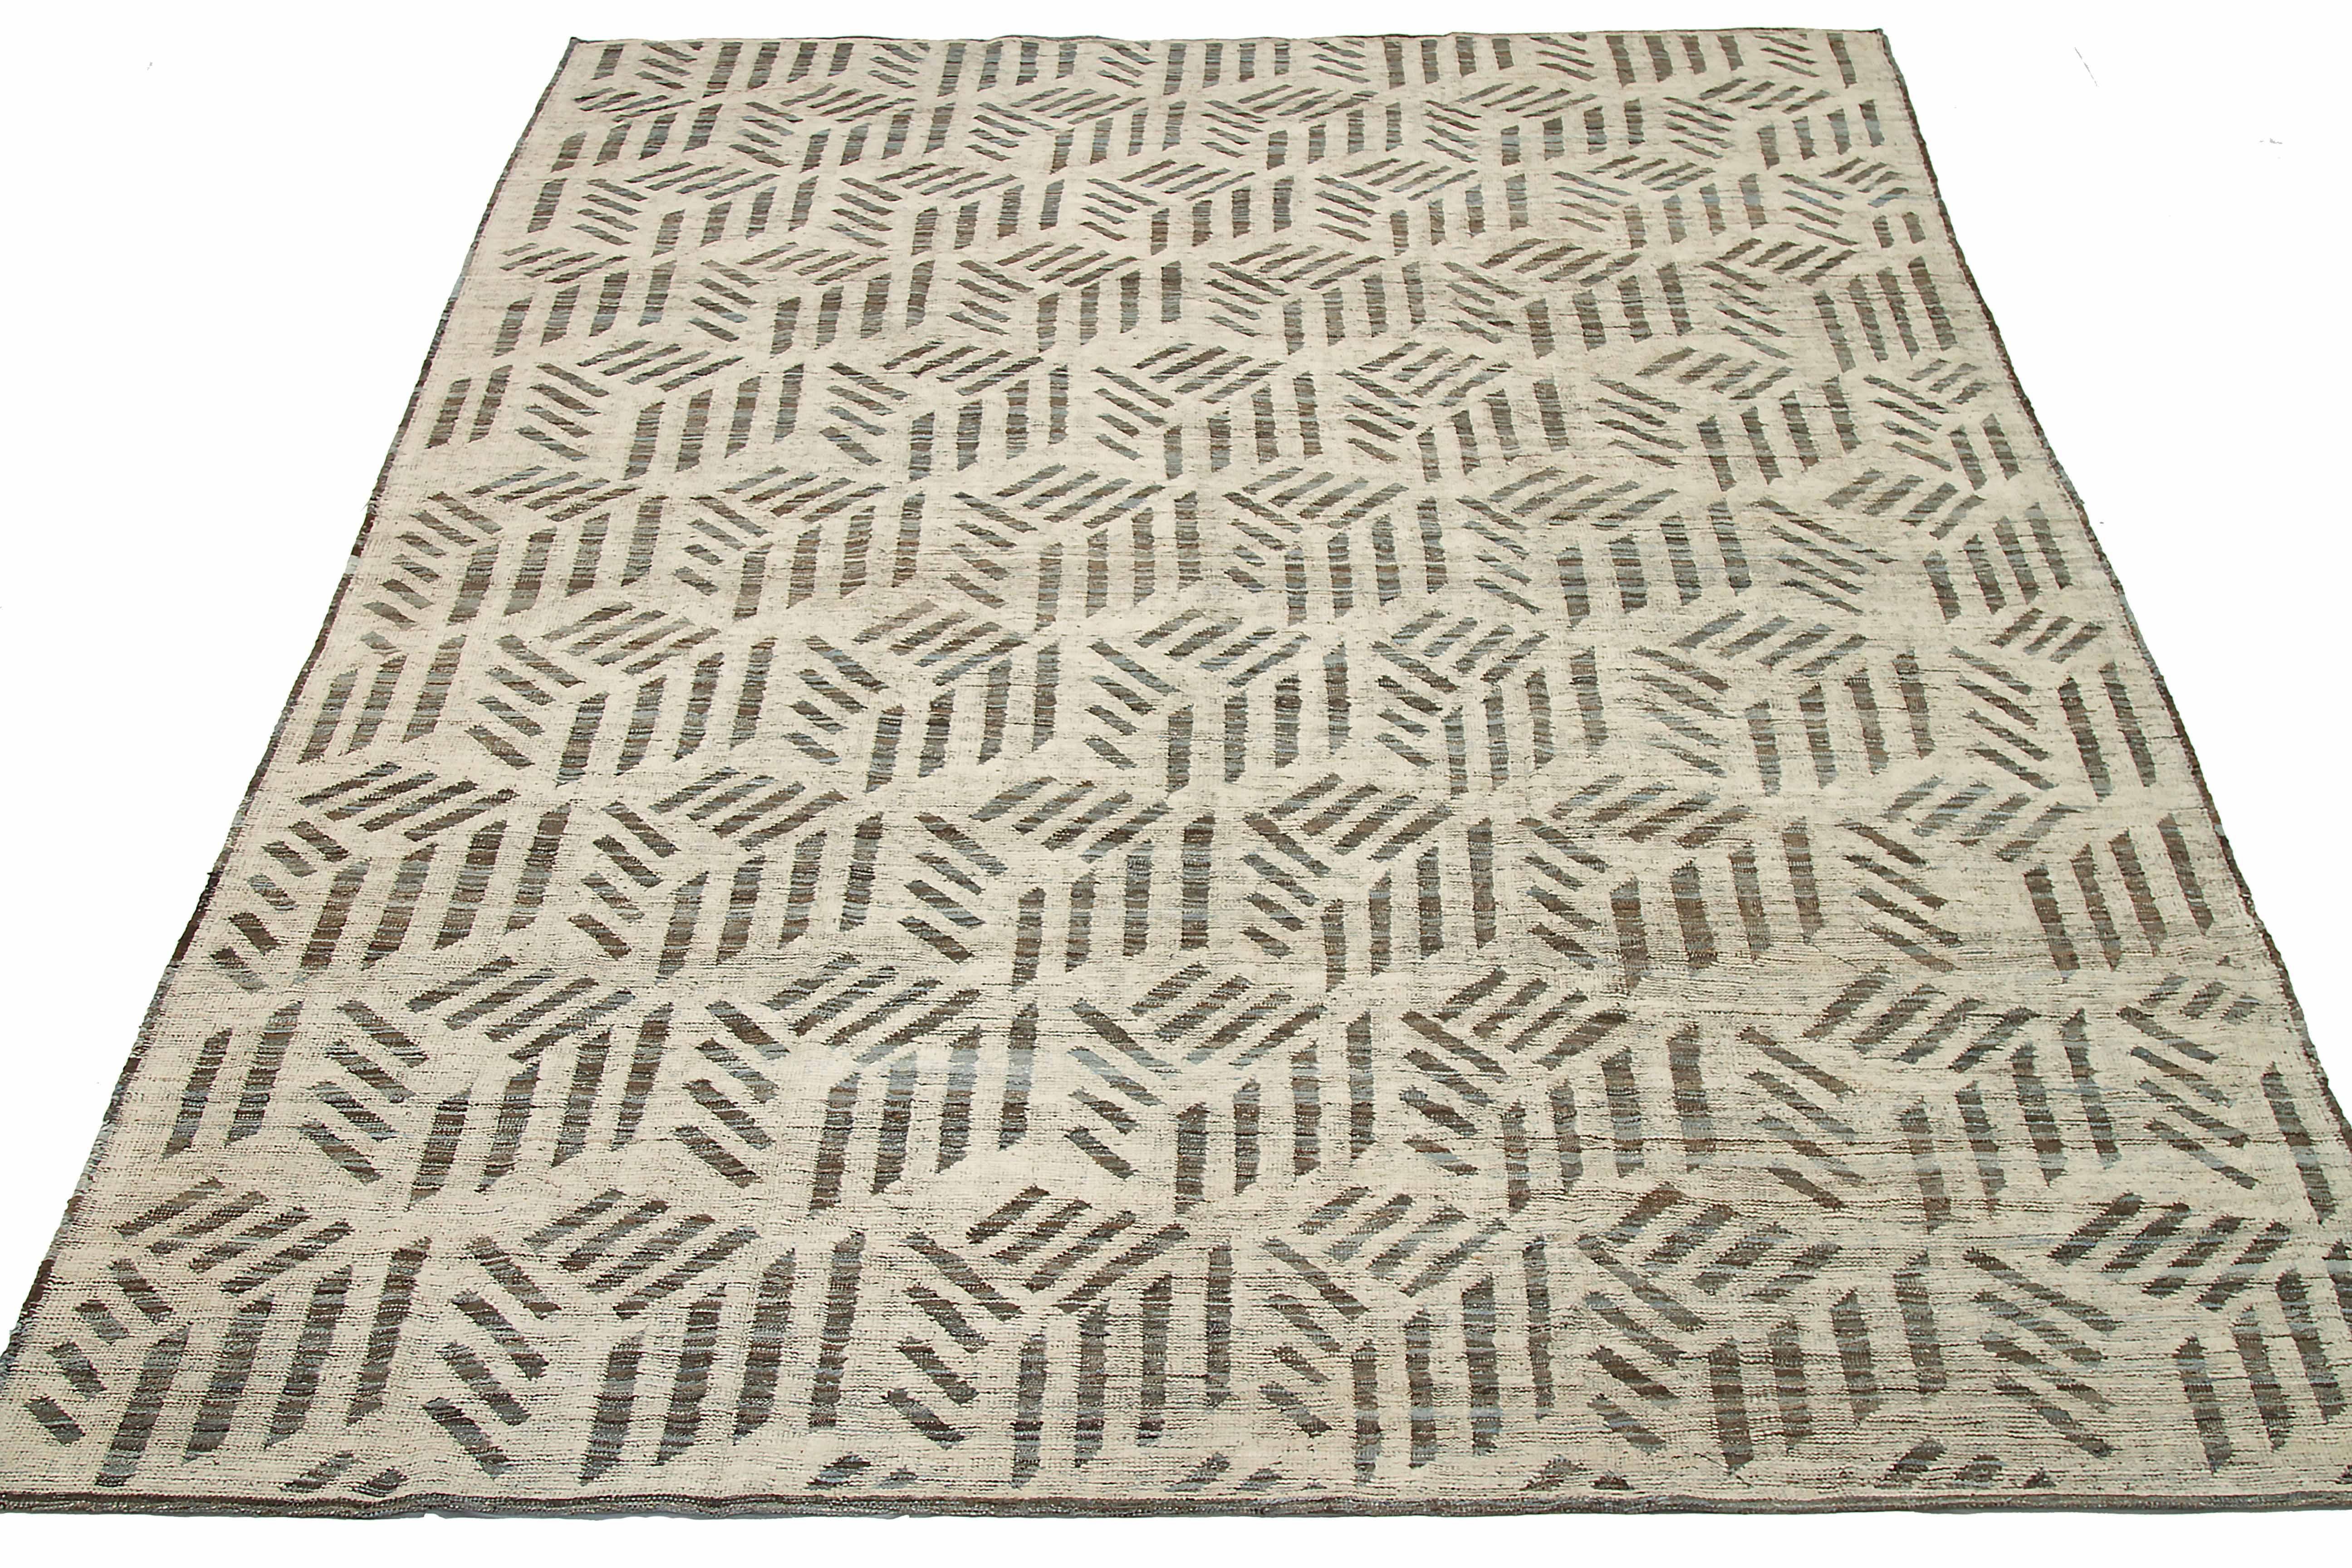 New Afghan area rug handwoven from the finest sheep’s wool. It’s colored with all-natural vegetable dyes that are safe for humans and pets. It’s a traditional Moroccan design handwoven by expert artisans. It’s a lovely area rug that can be